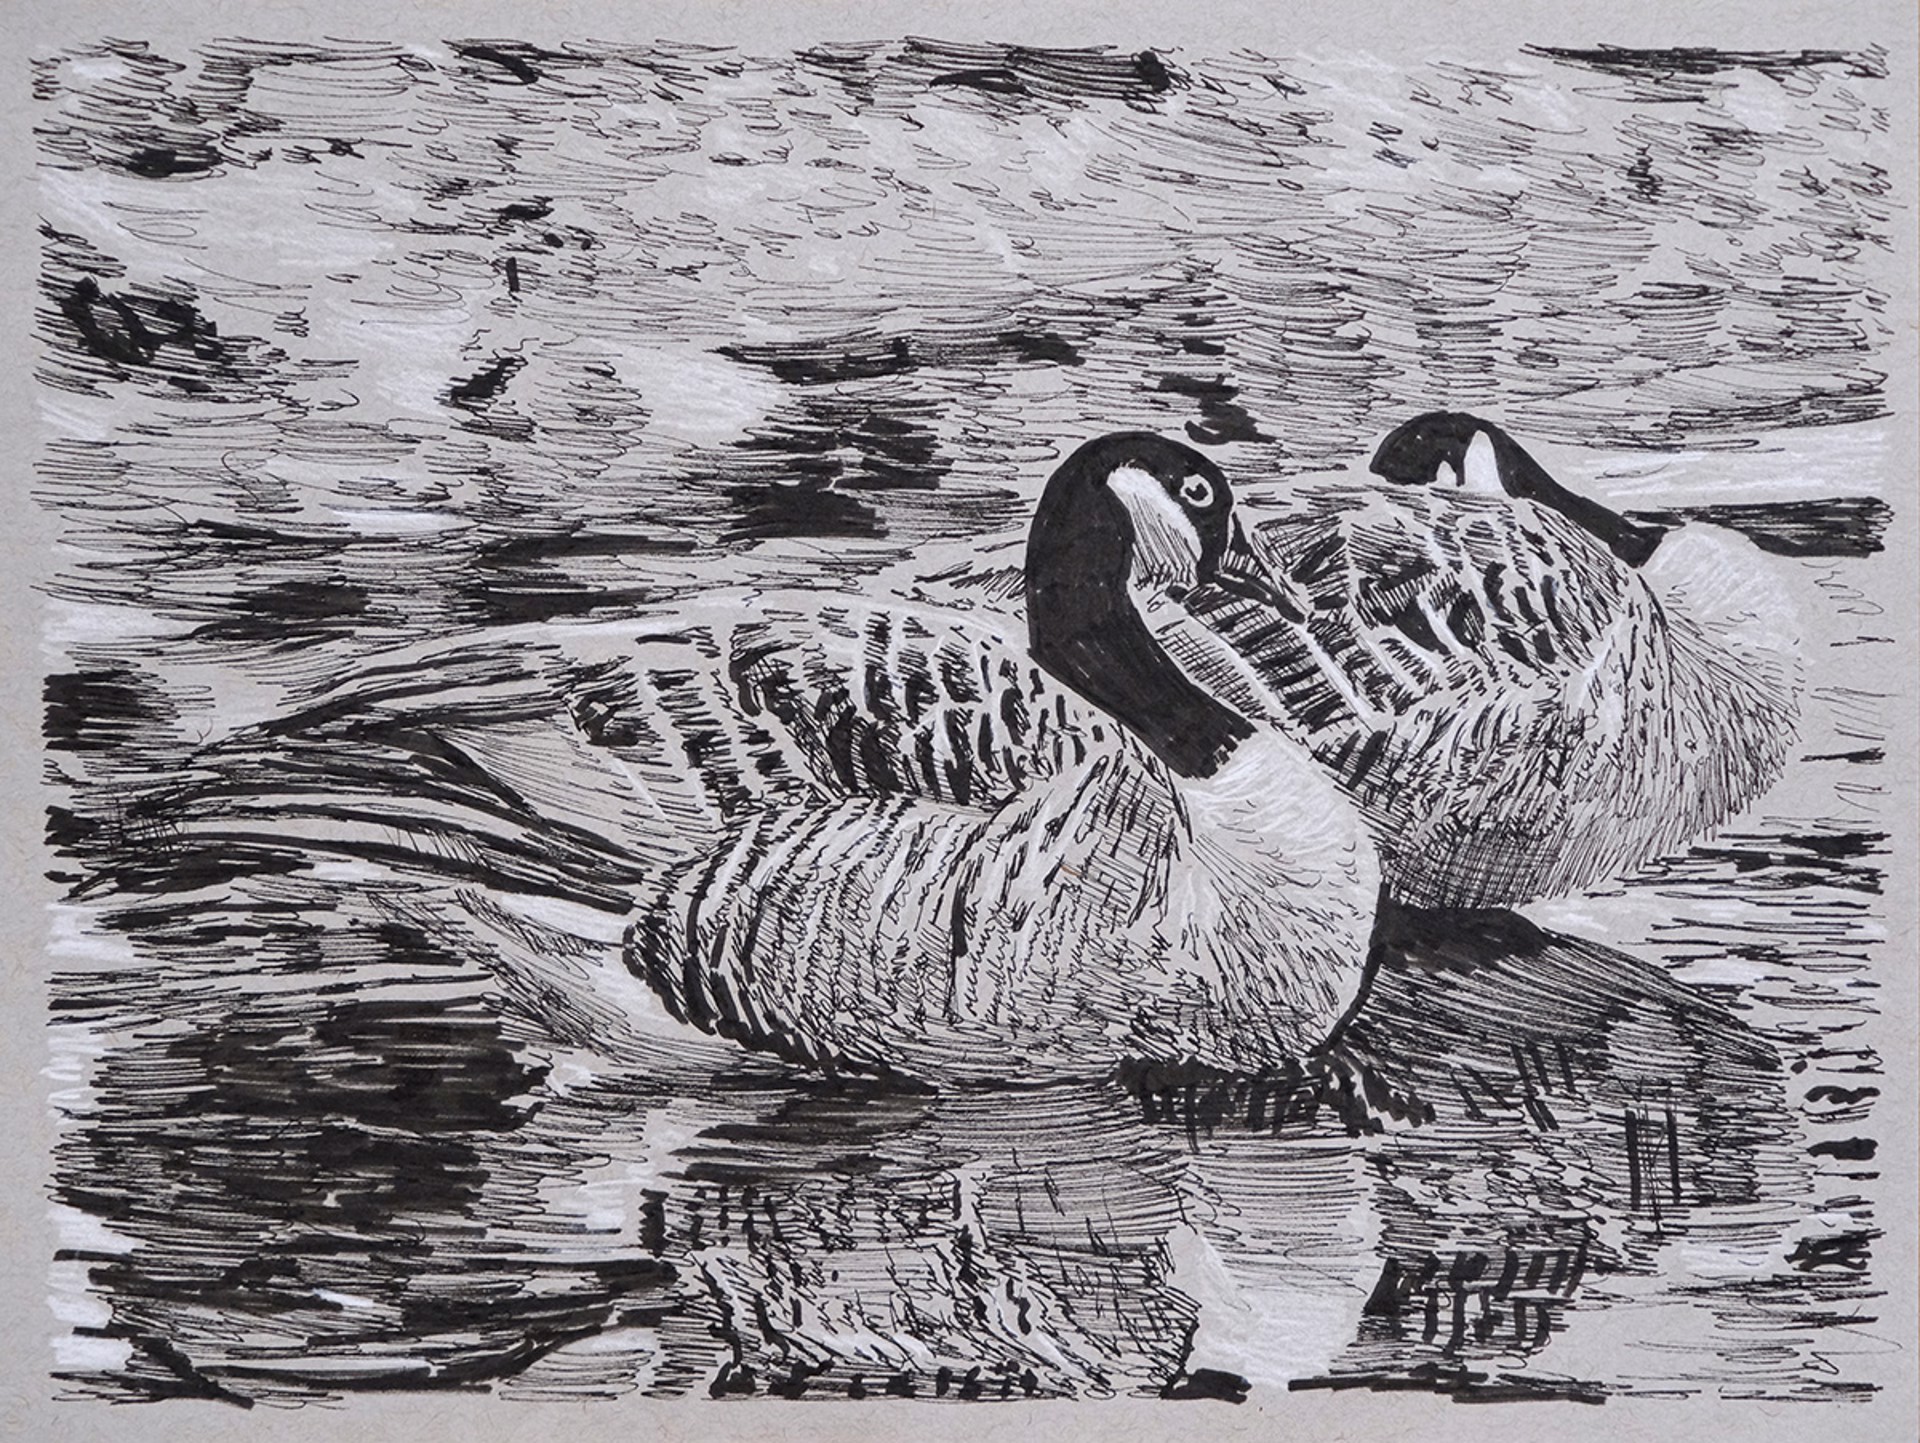 Sleeping Geese by Ed Ford